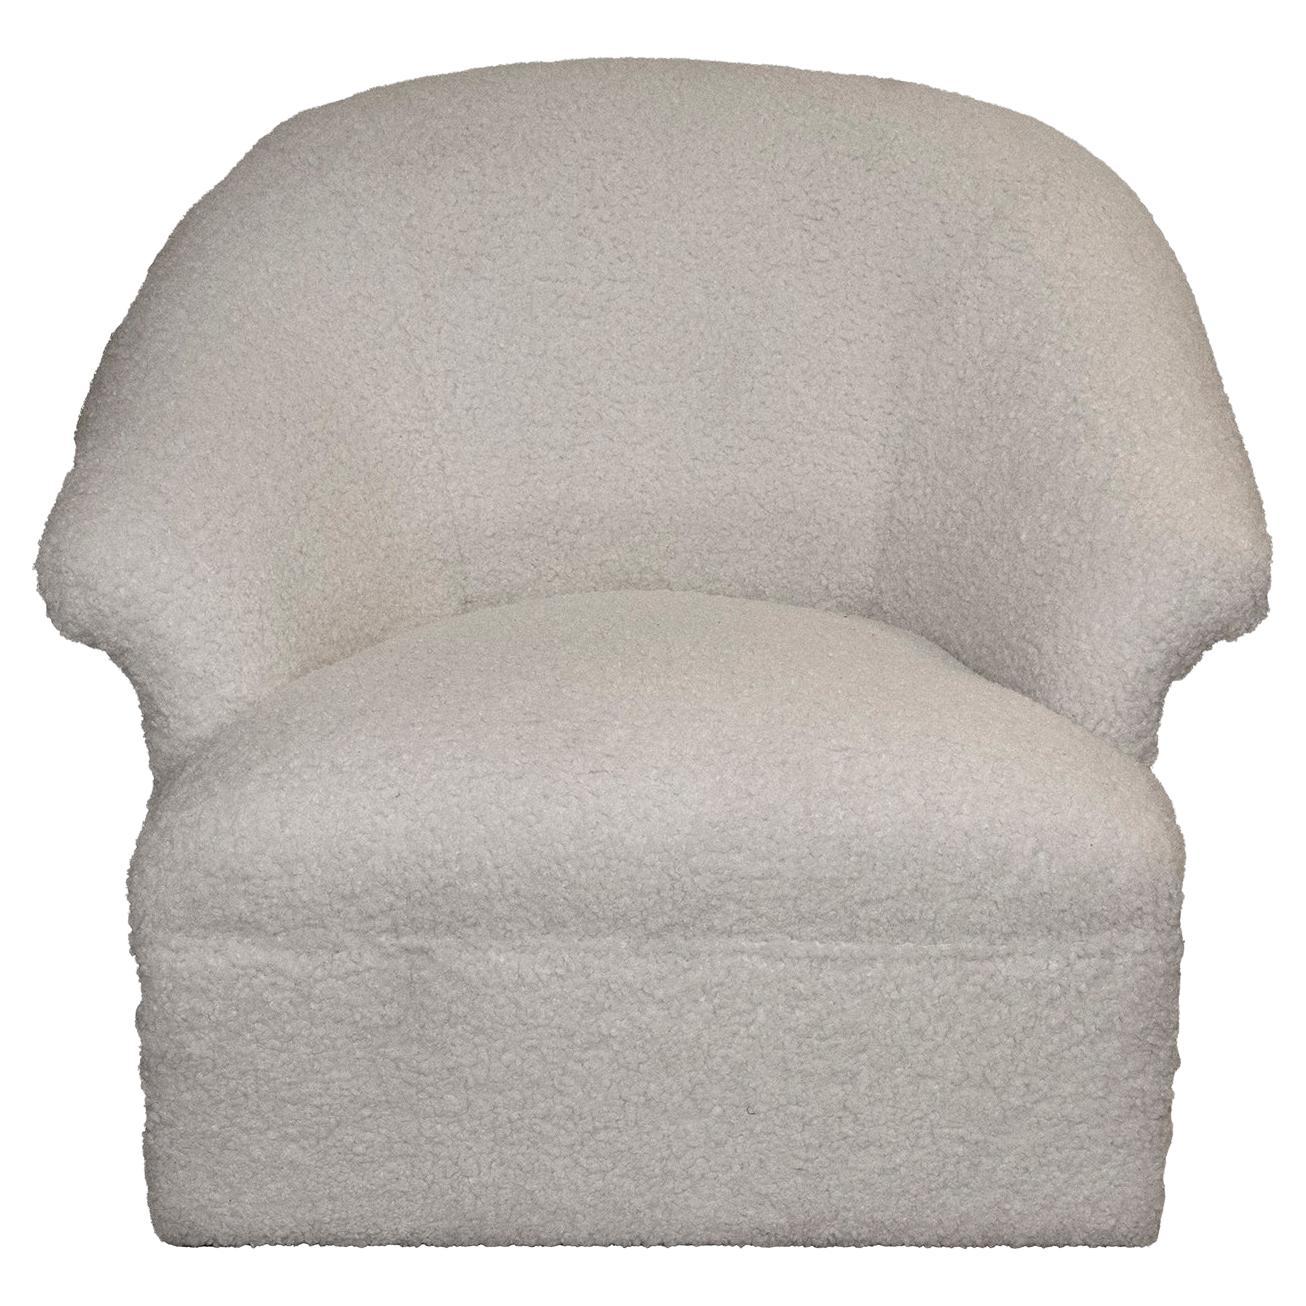 The generously sized curved swivel club chair, originally made by Henredon. Freshly upholstered in a white faux shearling fabric. The new faux shearling upholstery lends a contemporary feel. The swivel base makes this chair useable in many spaces.